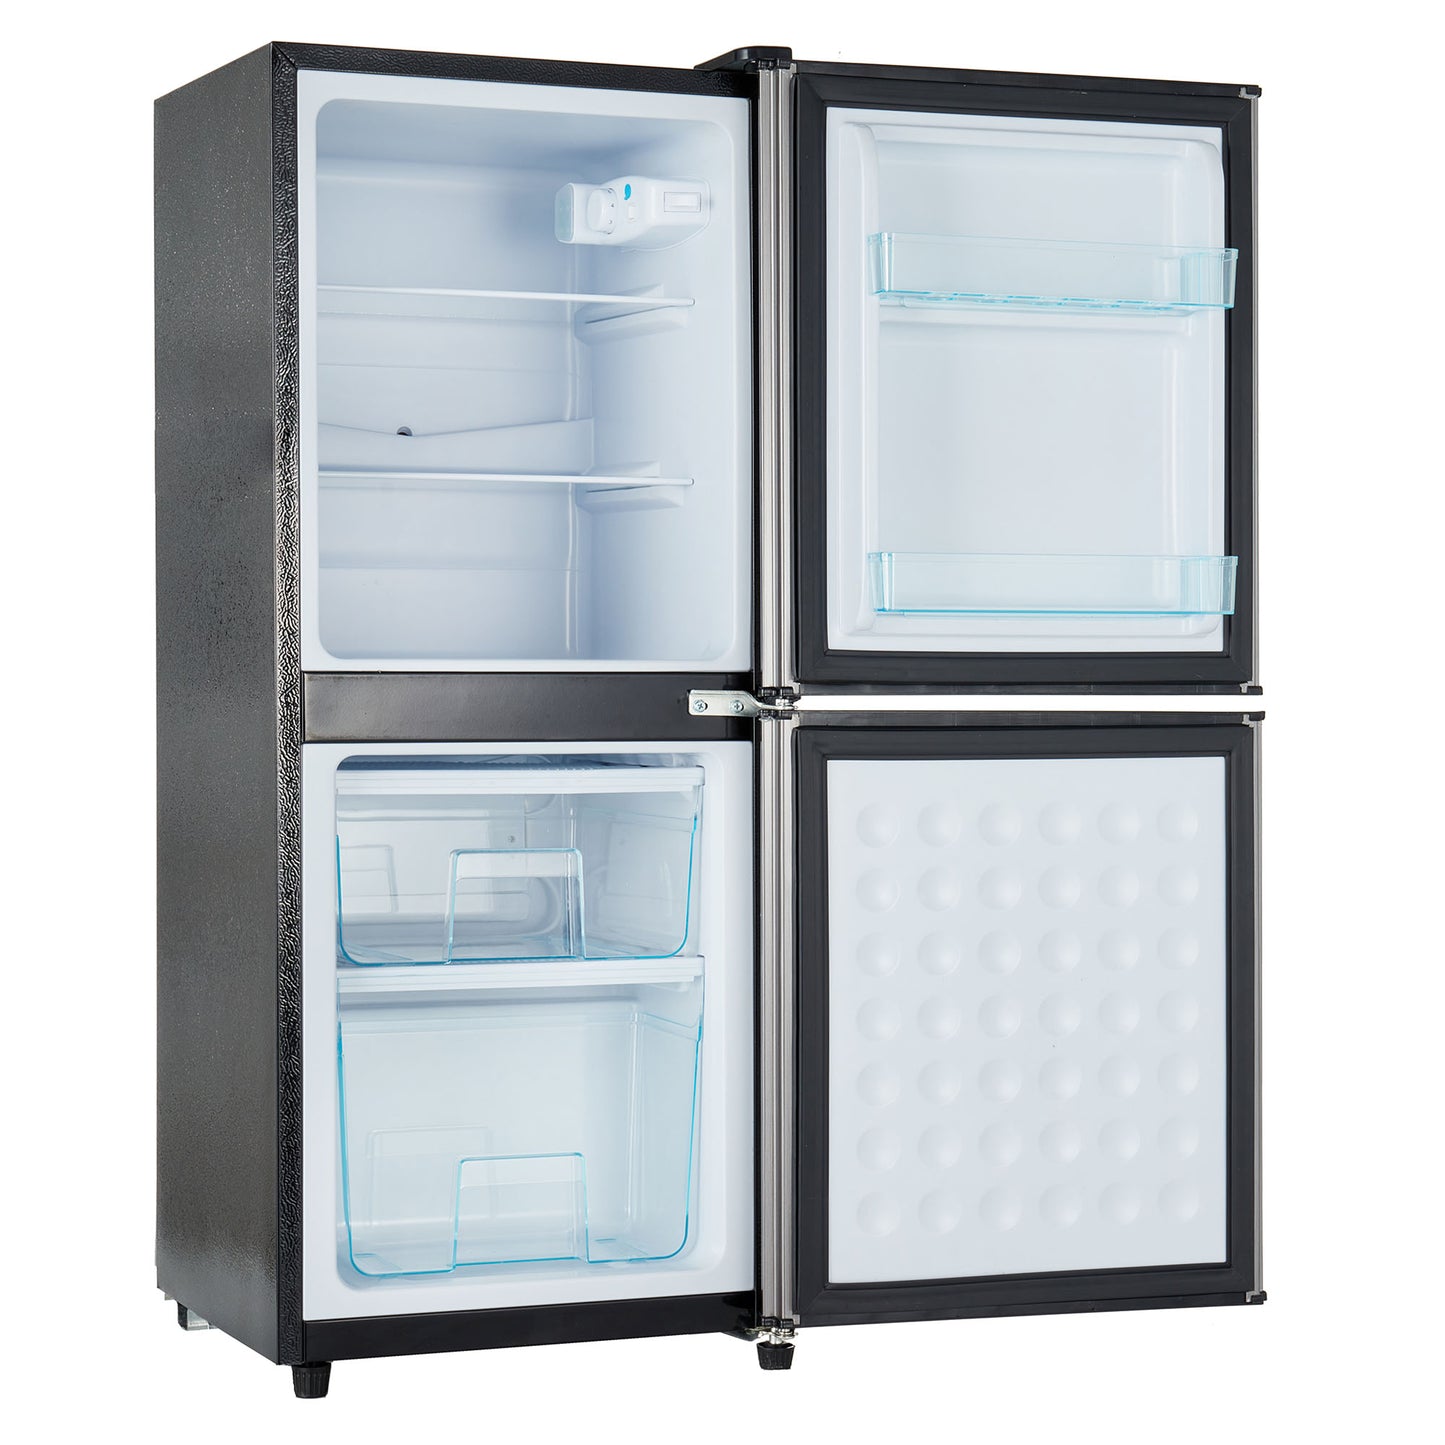 Dual Zone Refrigerator, 2.2+1.4Cu.Ft 4 Star Freezer, 7 Temperature Settings, 45 dB, Brushed Gray Silver, LED Lighting